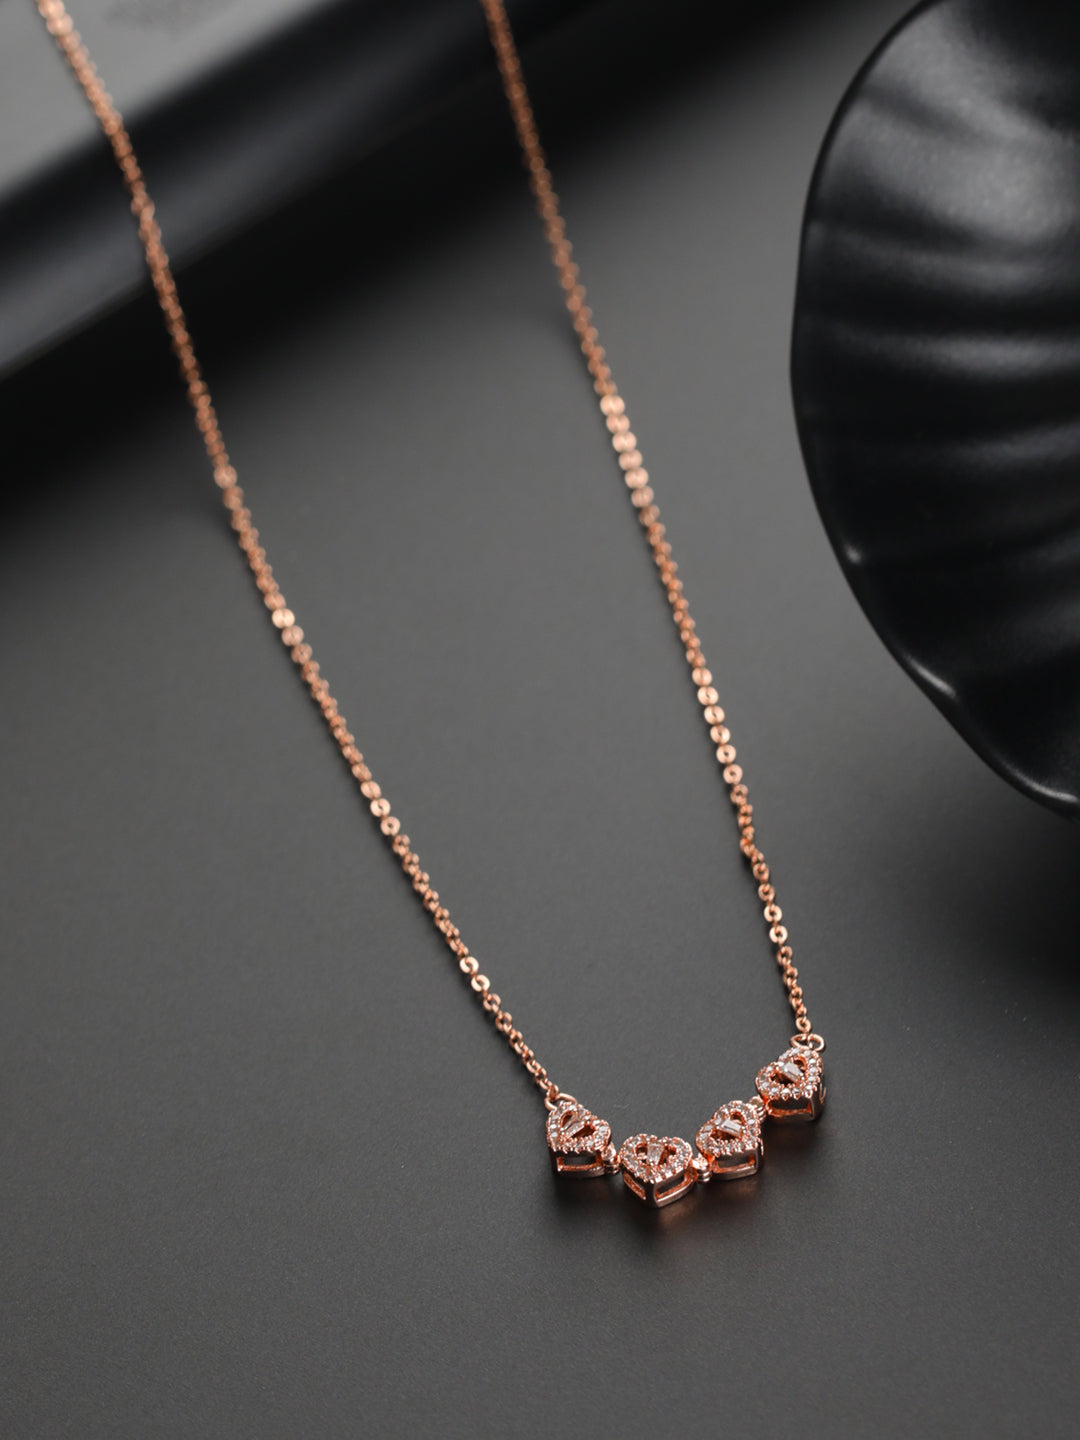 Priyaasi Hearts American Diamond Rose Gold-Plated Necklace